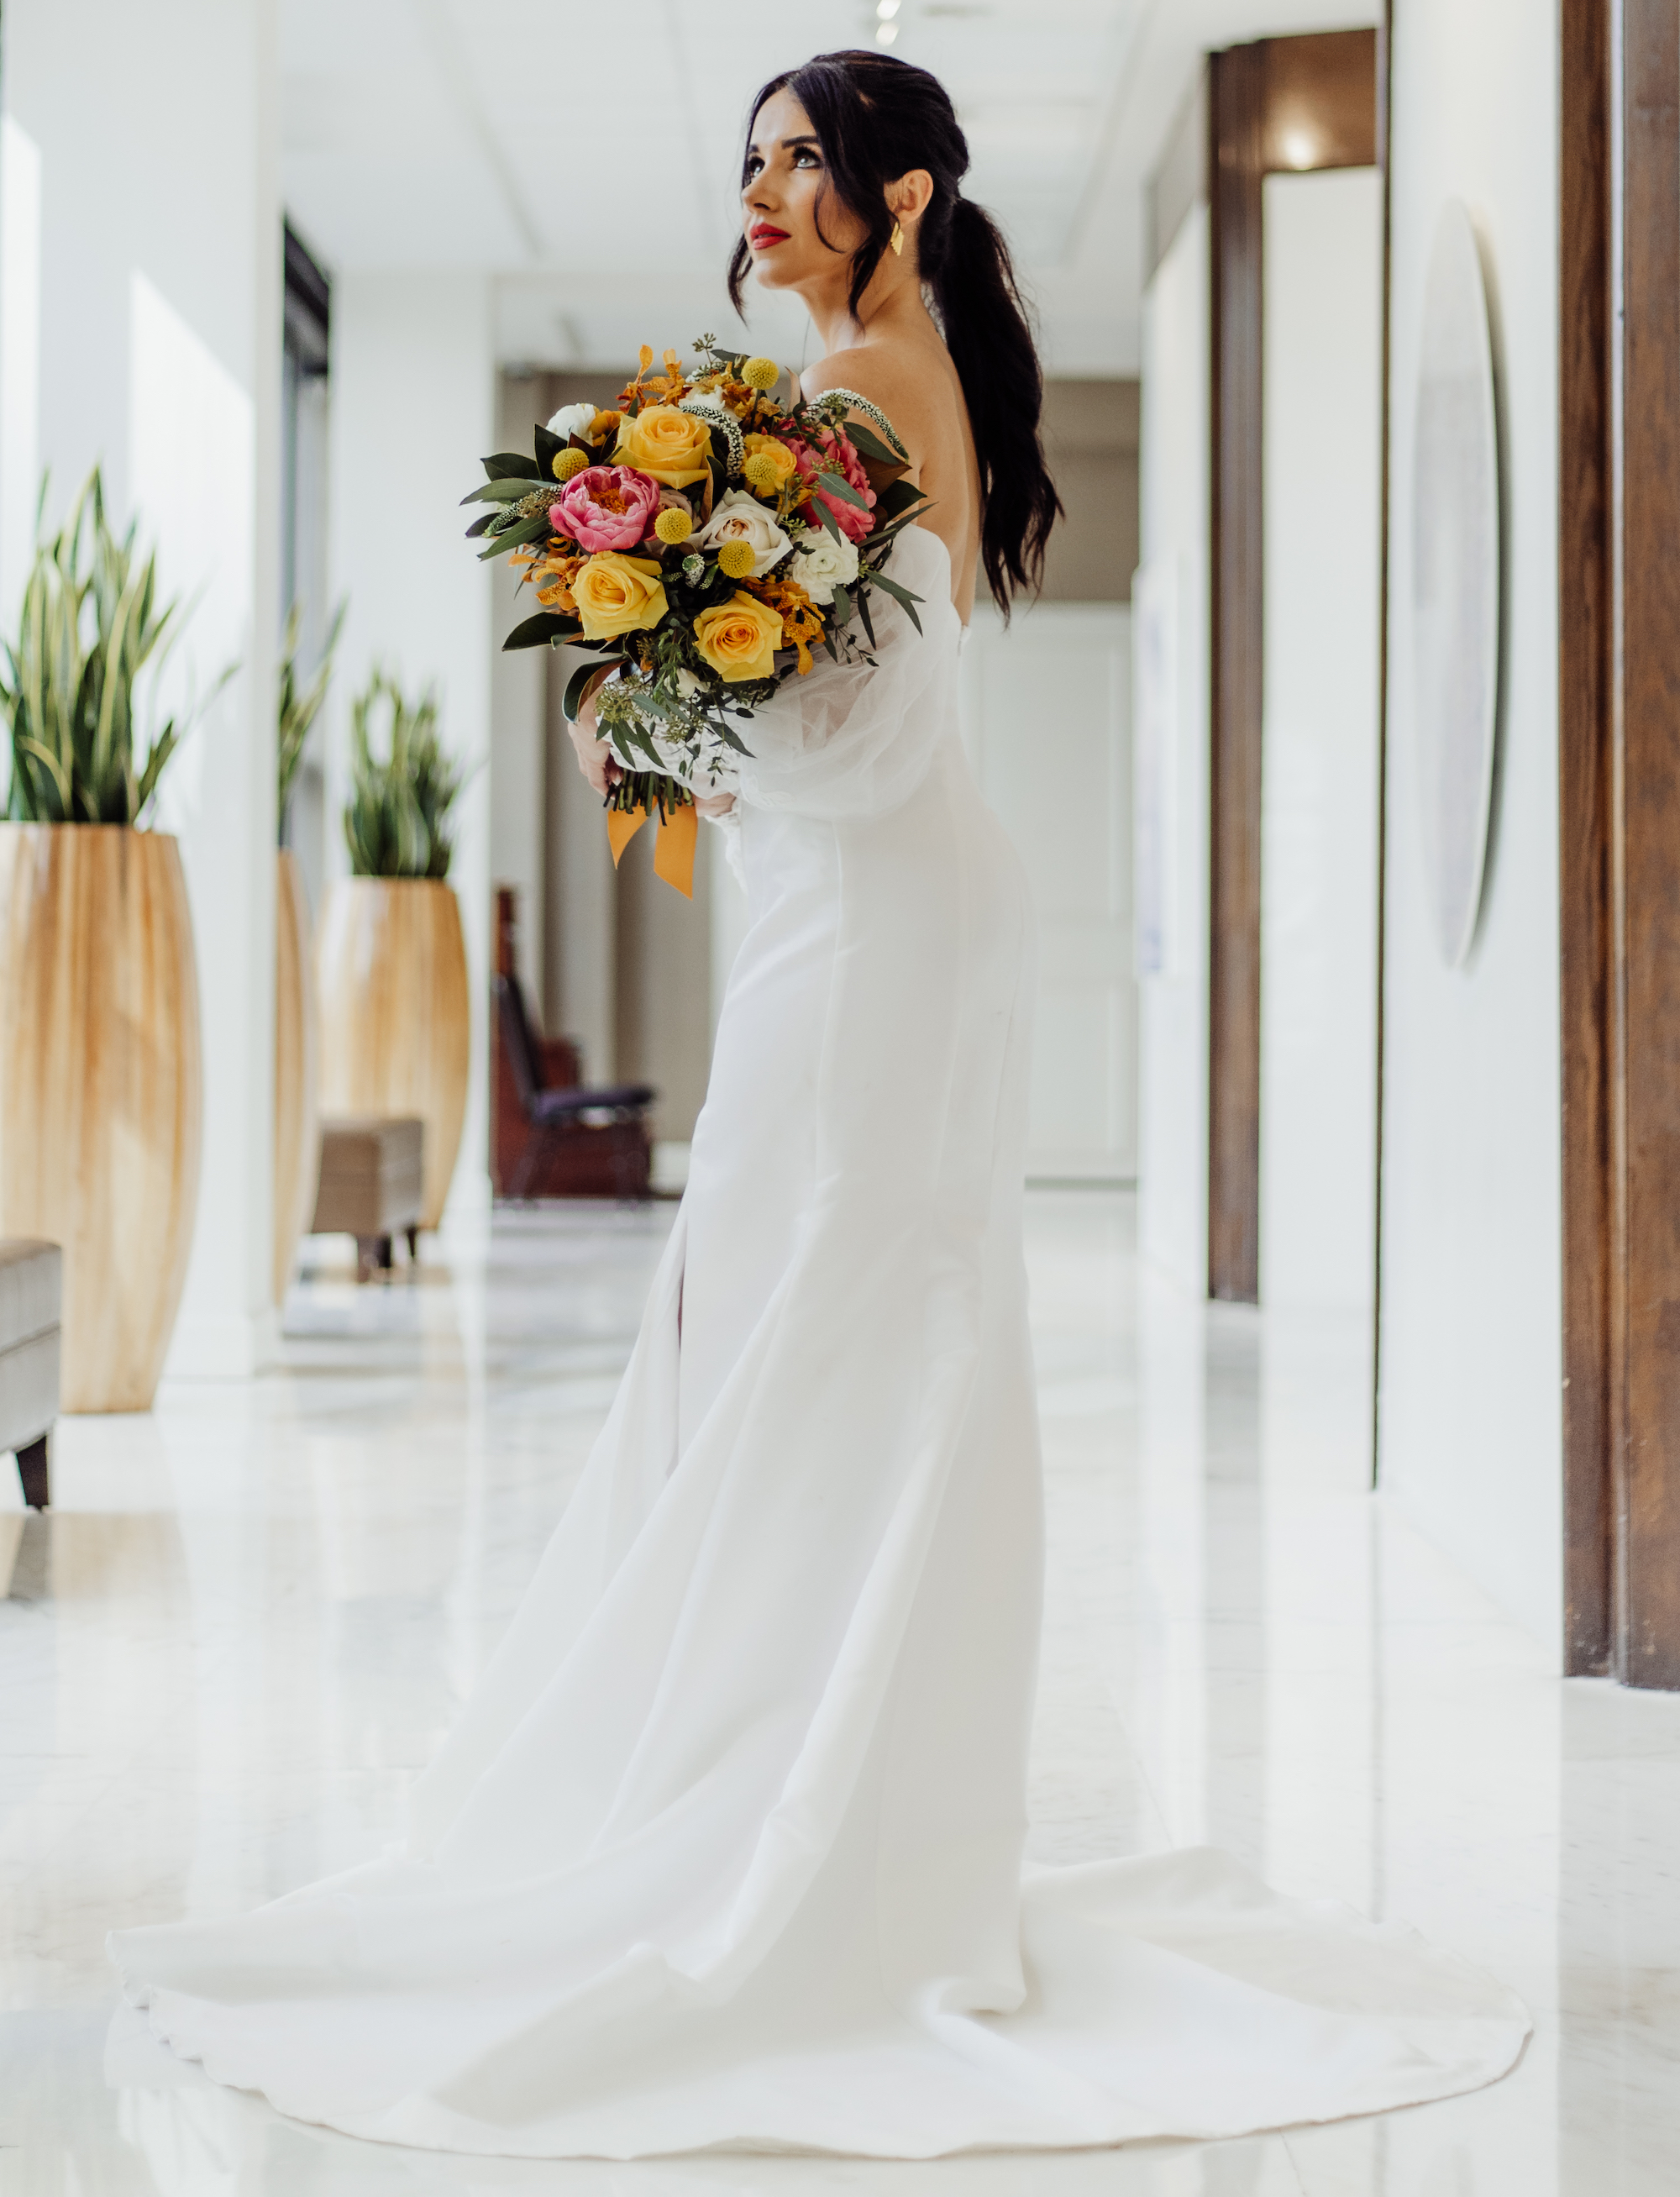 The bride holds her bouquet and looks up, posing for a vibrant retro-inspired styled shoot photo.